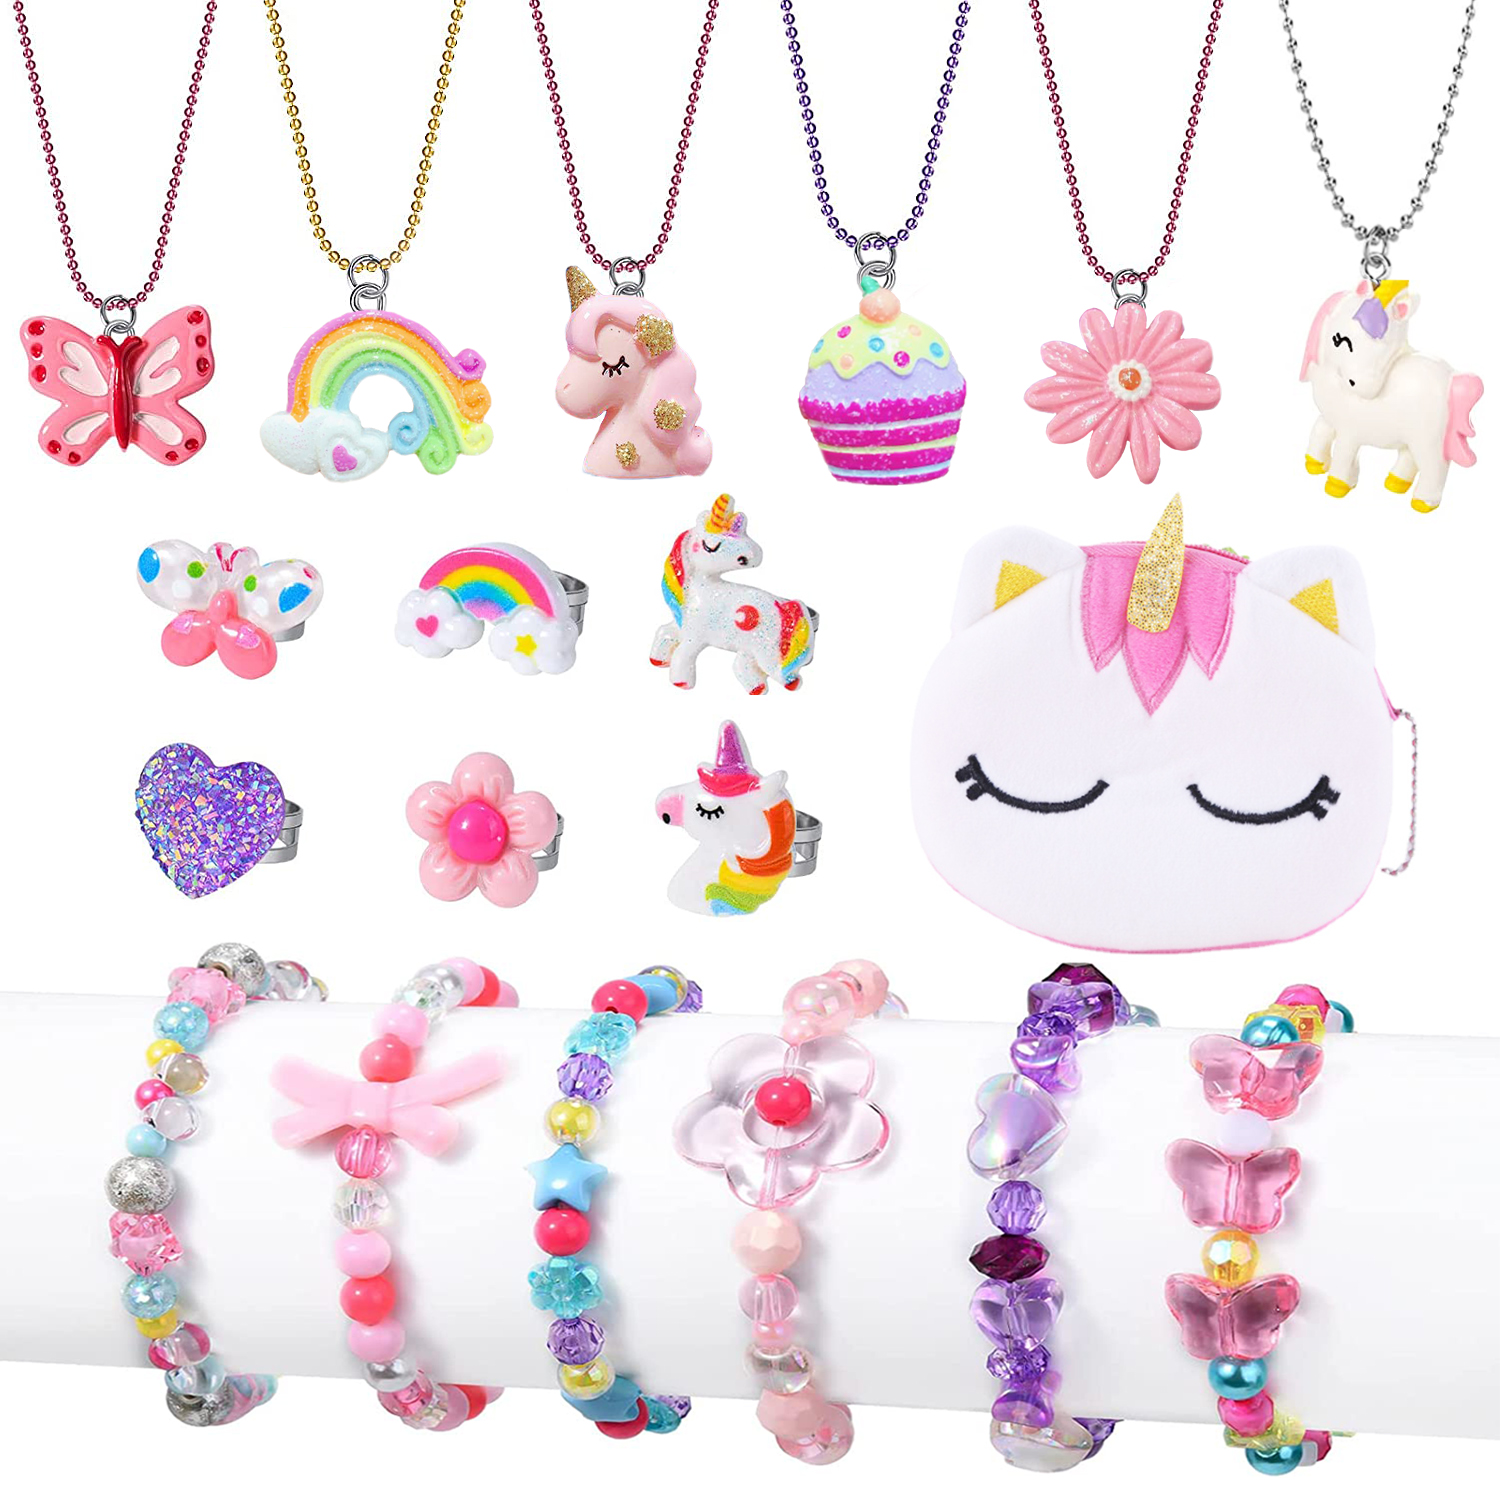 Sytle-Carry 19 Pcs Kids Jewelry for Kids Girls, Toddlers Necklaces  Bracelets and Rings Set, Cute Charm Play Jewelry Set, Toys for Kids Girls  3-6 Years